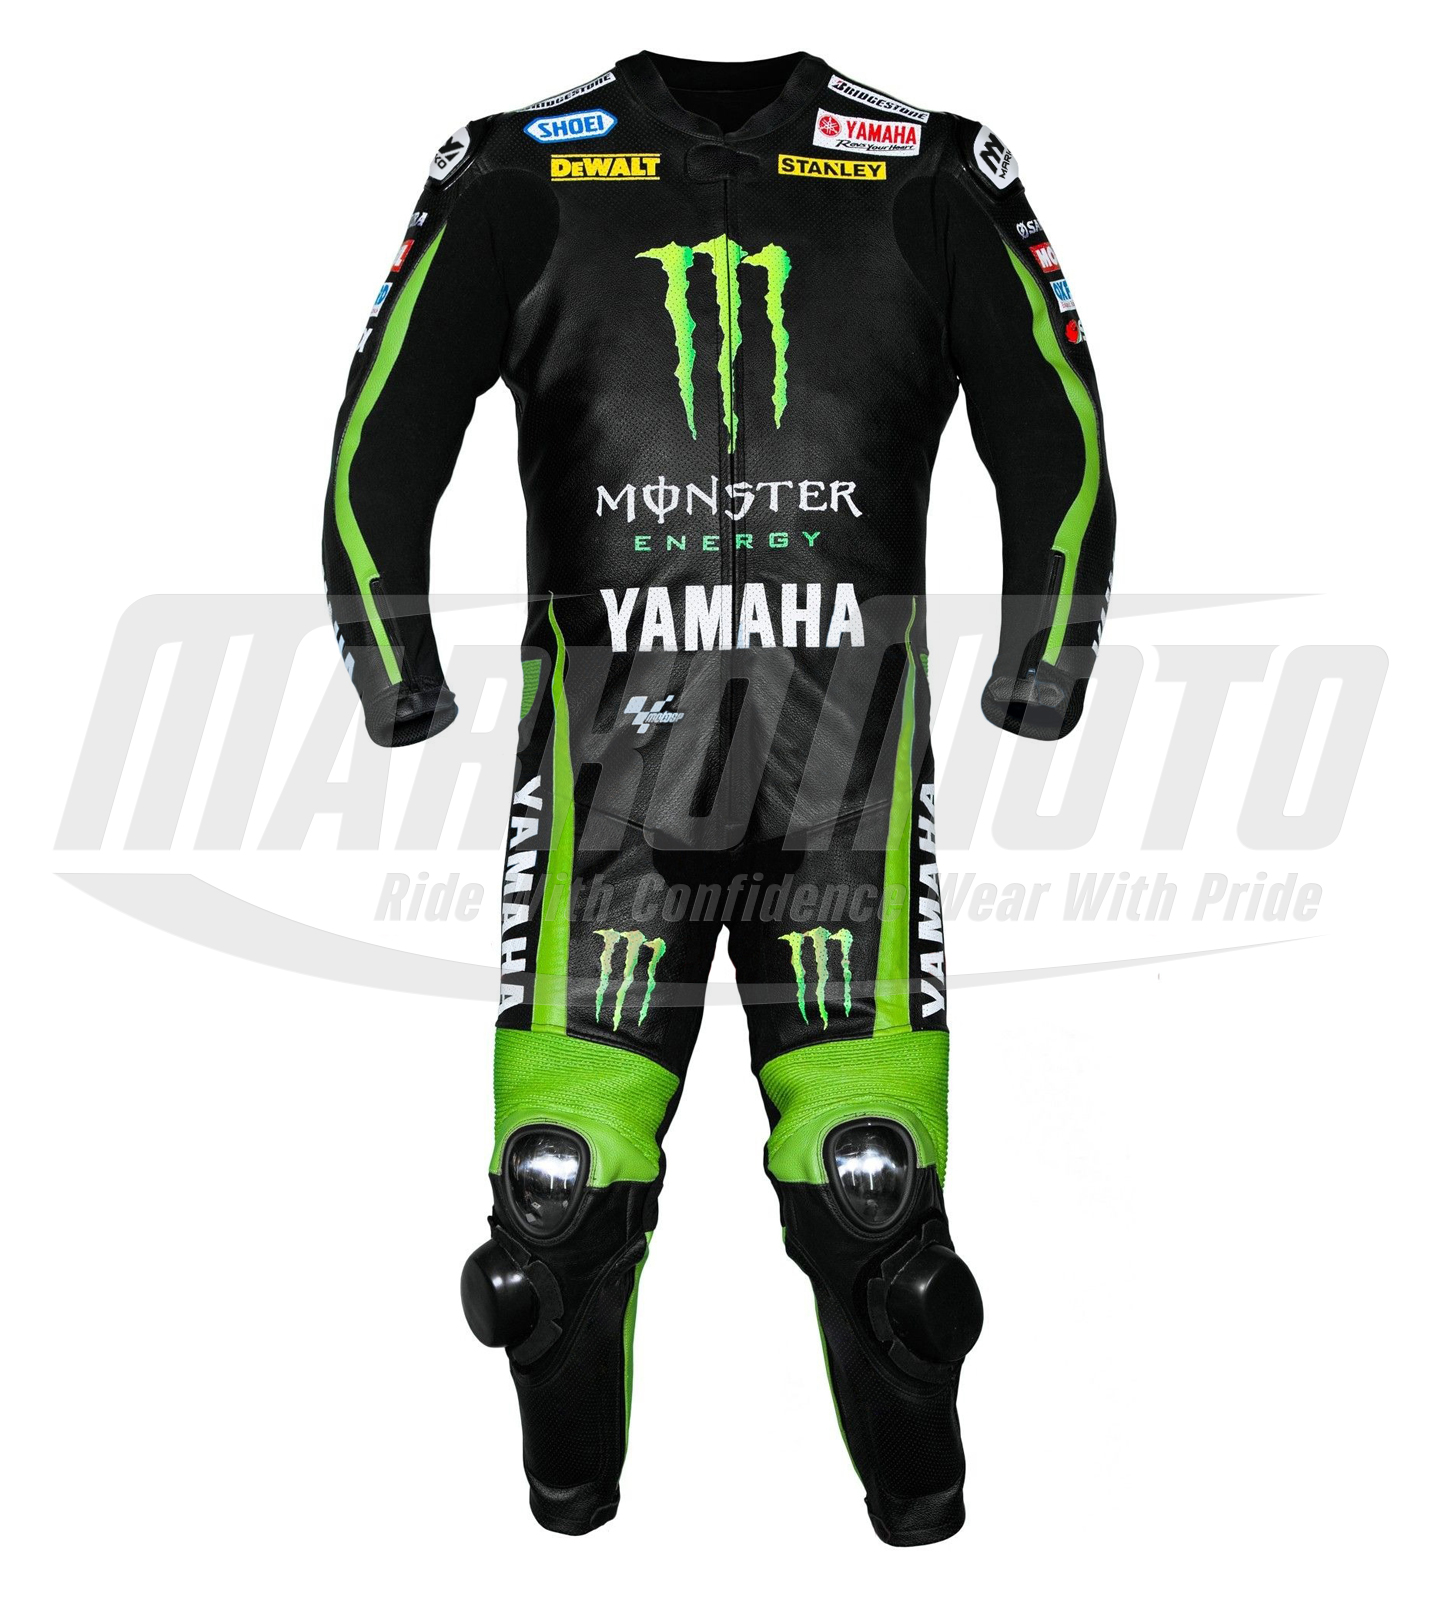 Bradley Smith Monster Energy 2015 Motorcycle Racing Suit 1pc & 2pcs